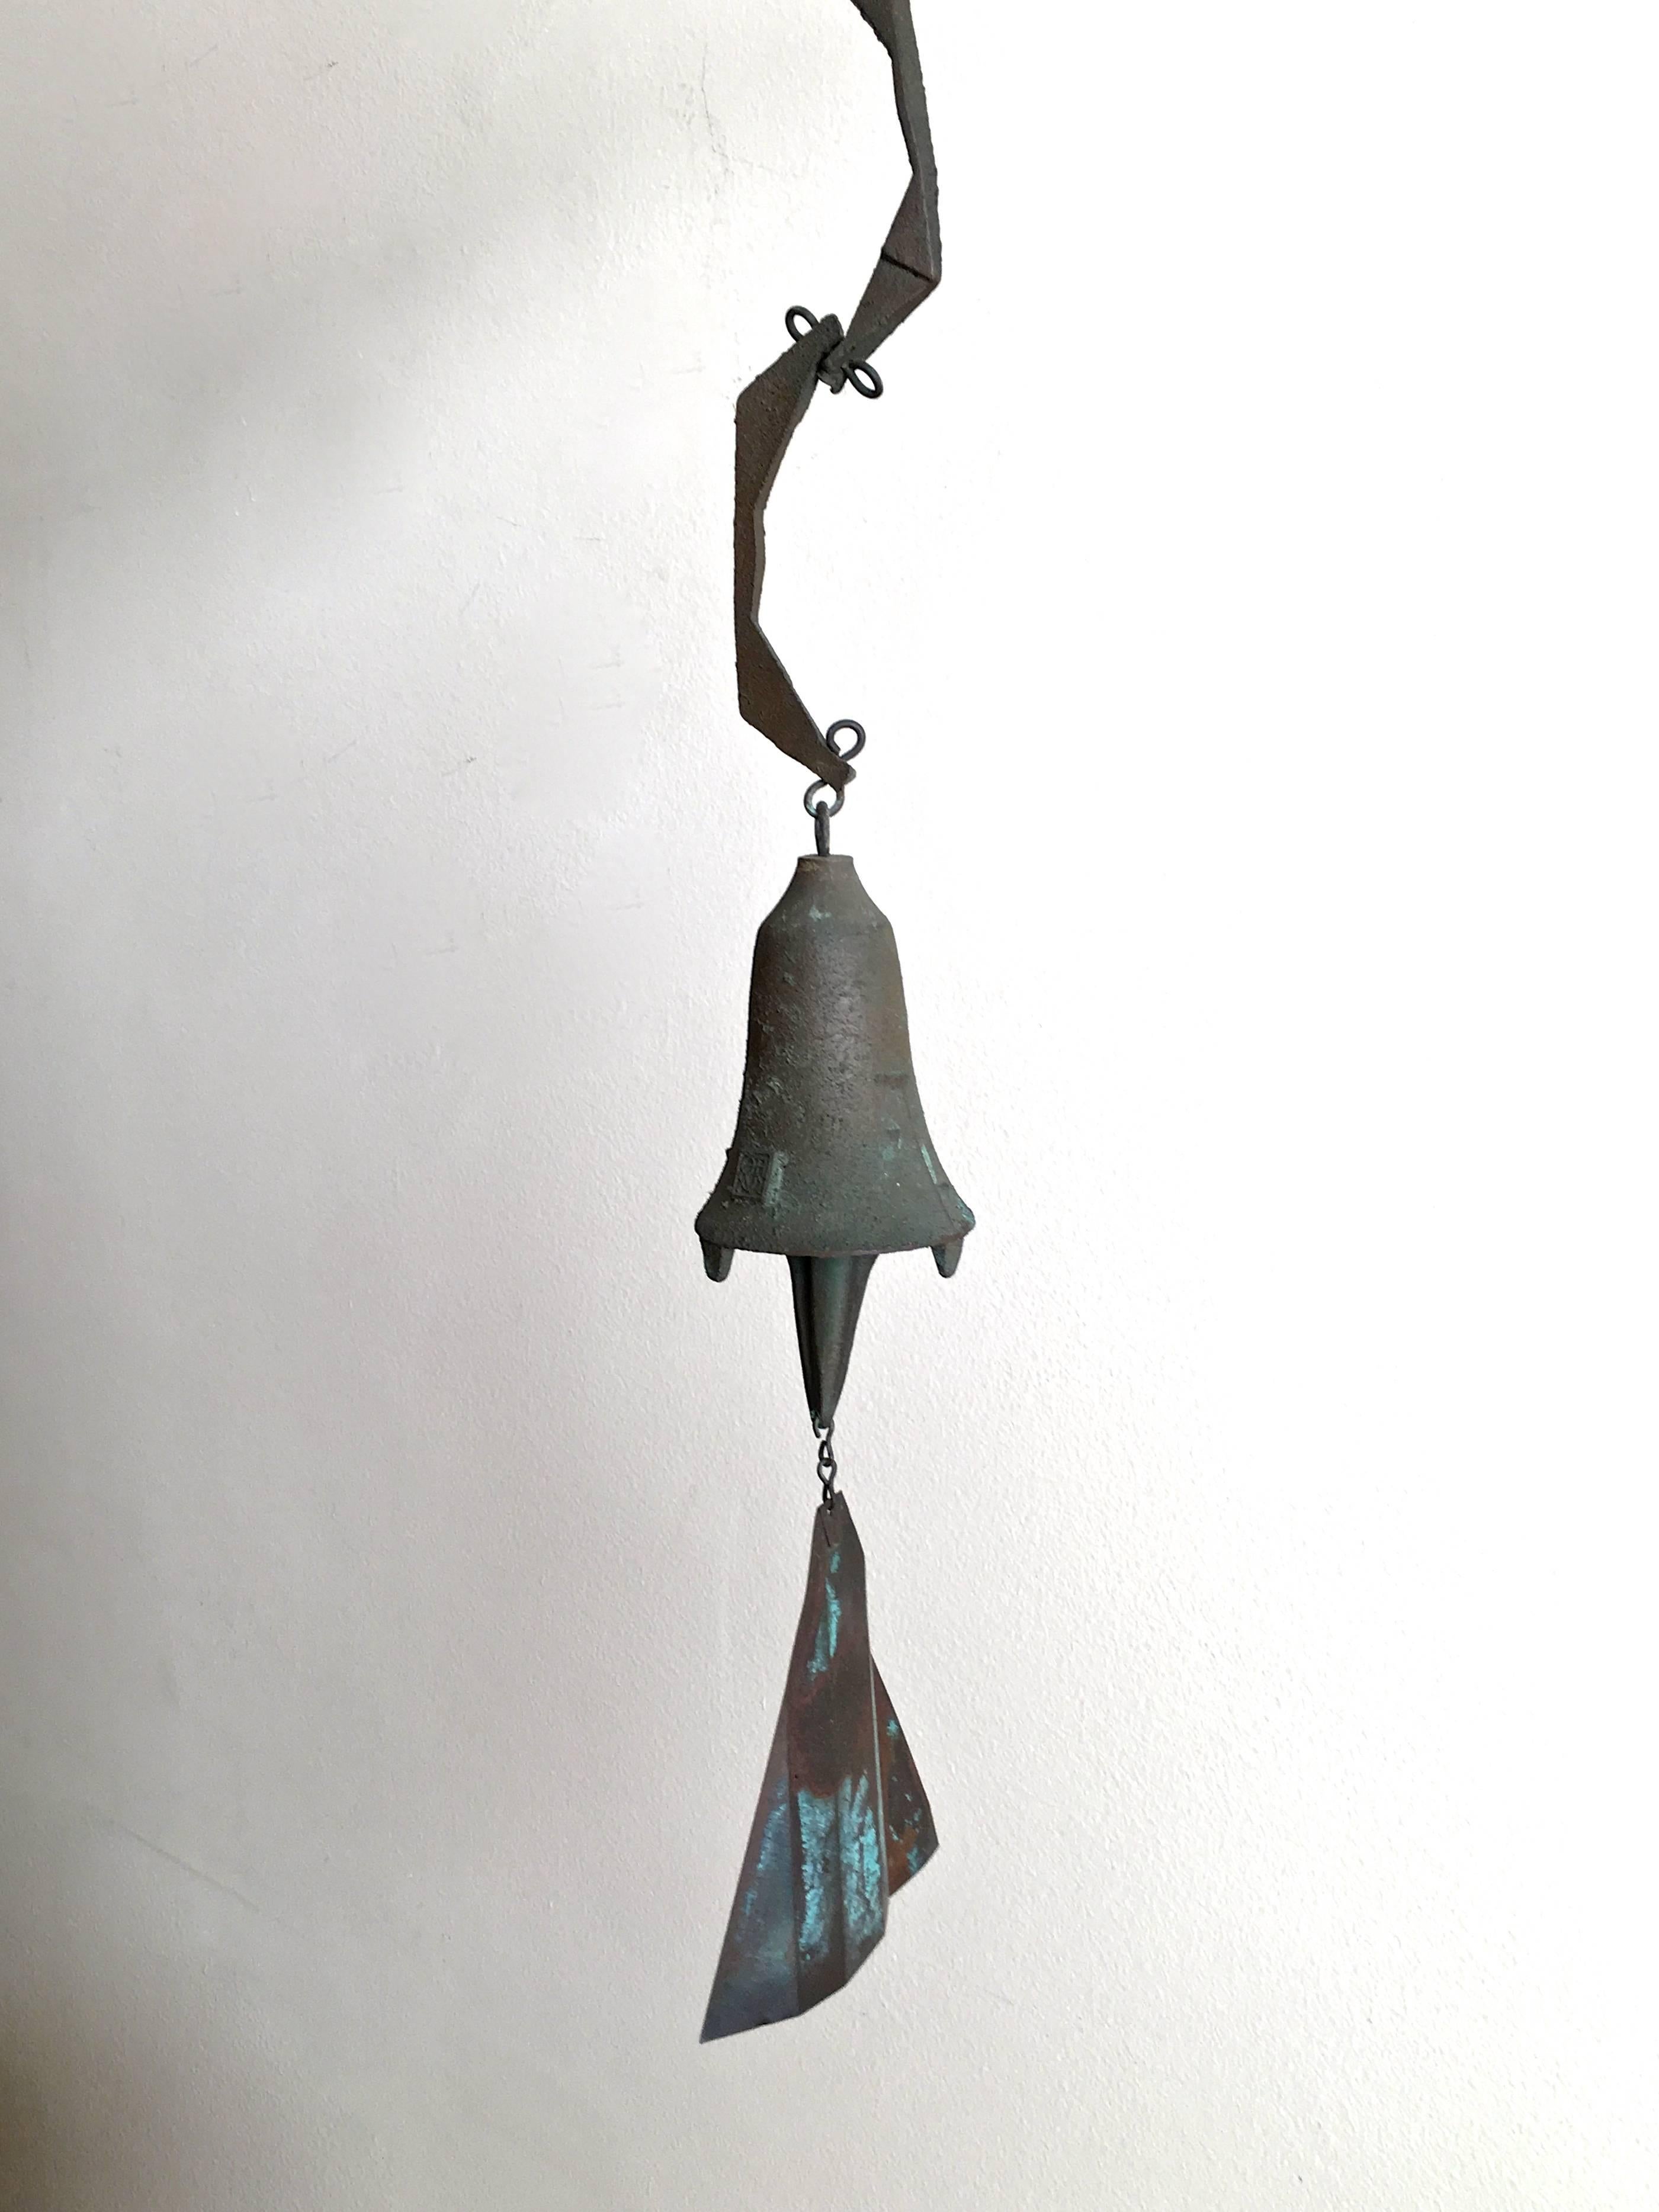 Paolo Soleri wind bell.

USA, circa 1970s.
Makers Mark.

Measures: H 23